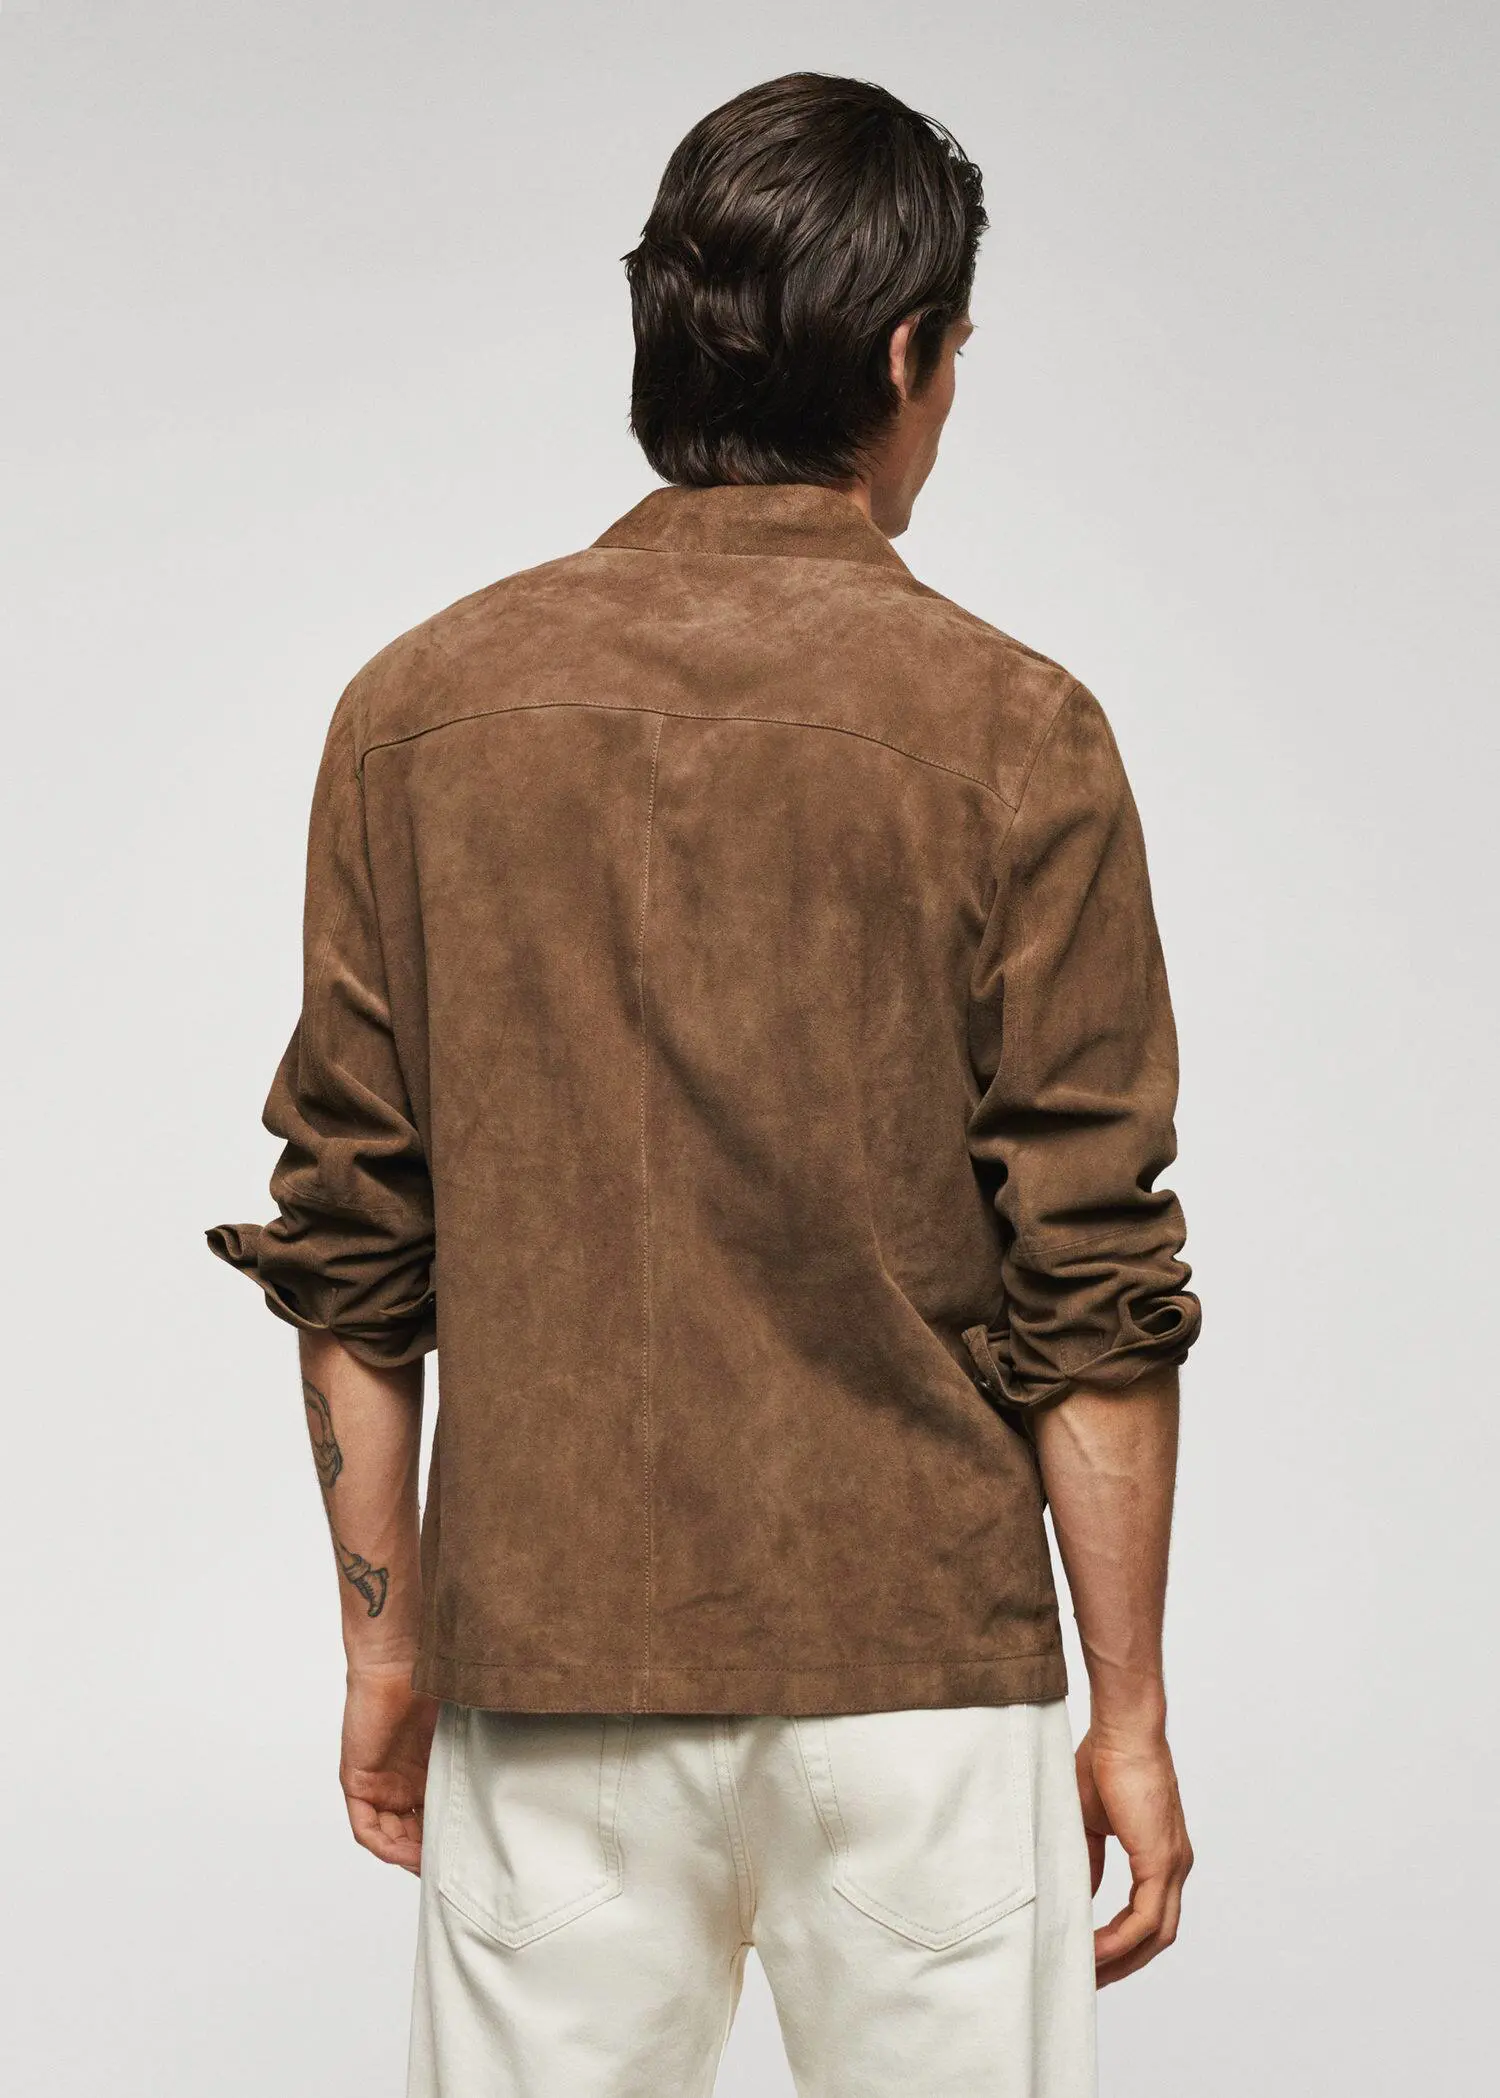 Mango 100% suede leather jacket. a man wearing a brown jacket standing in front of a wall. 